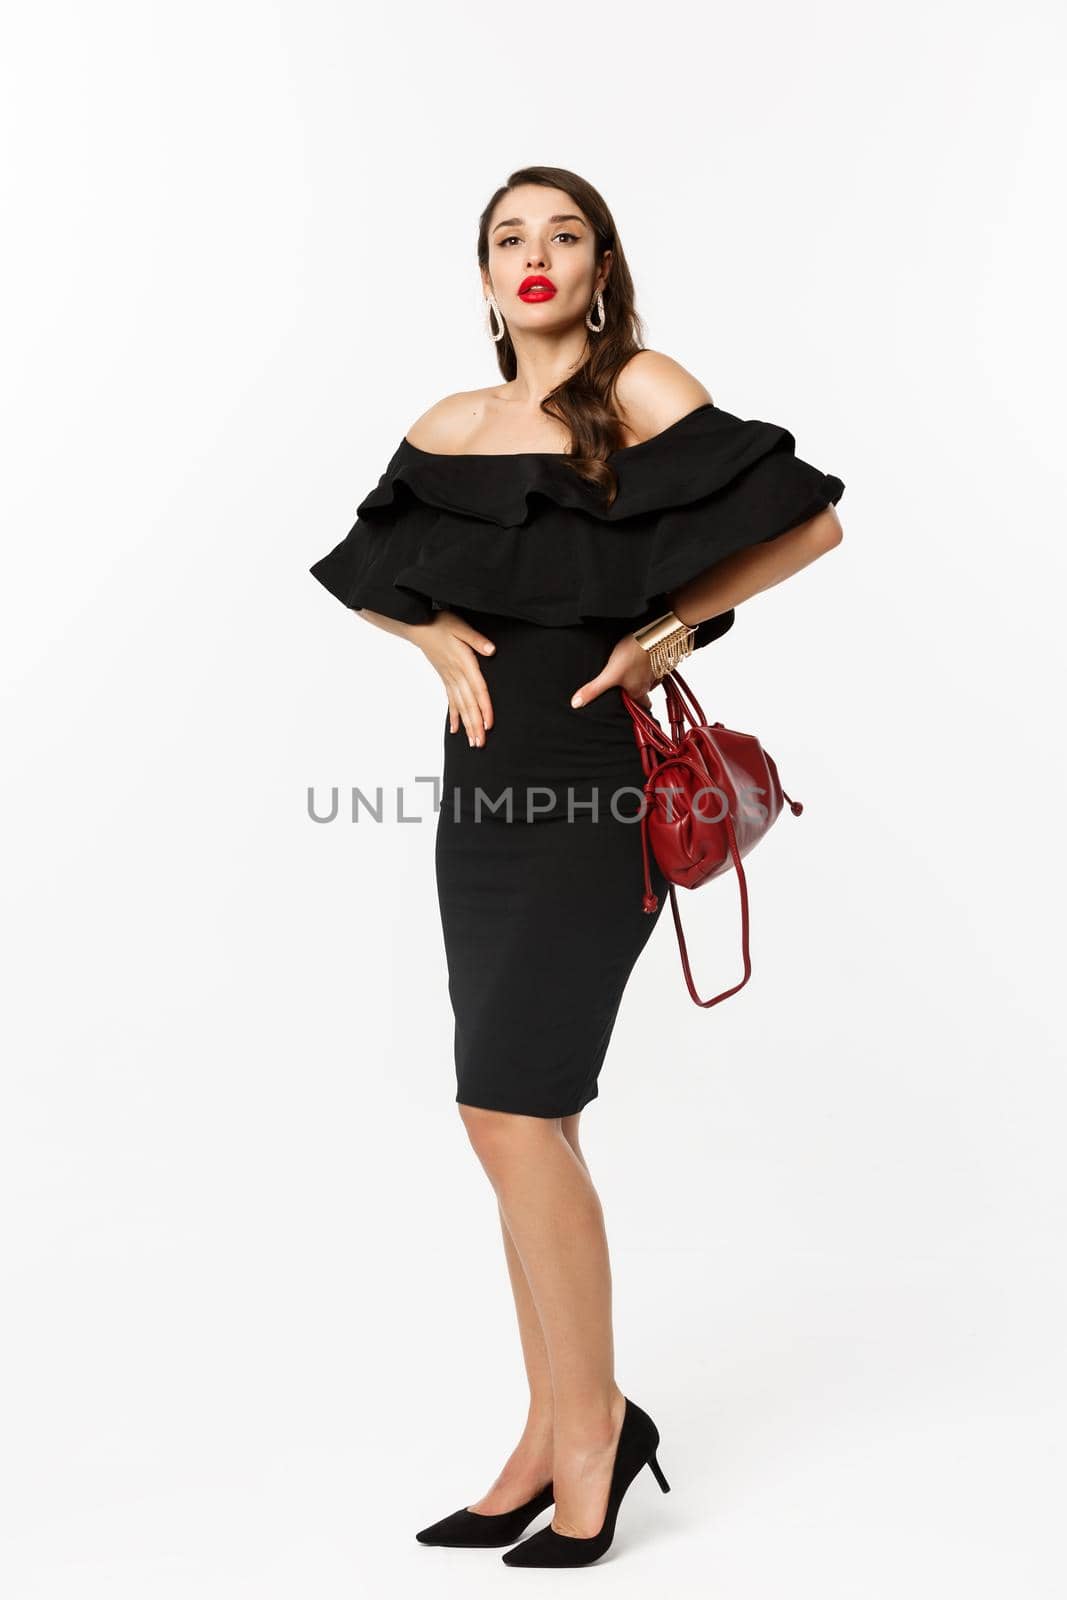 Beauty and fashion concept. Full length of elegant young woman going on party in black dress, high heels, looking confident and sassy at camera, white background.